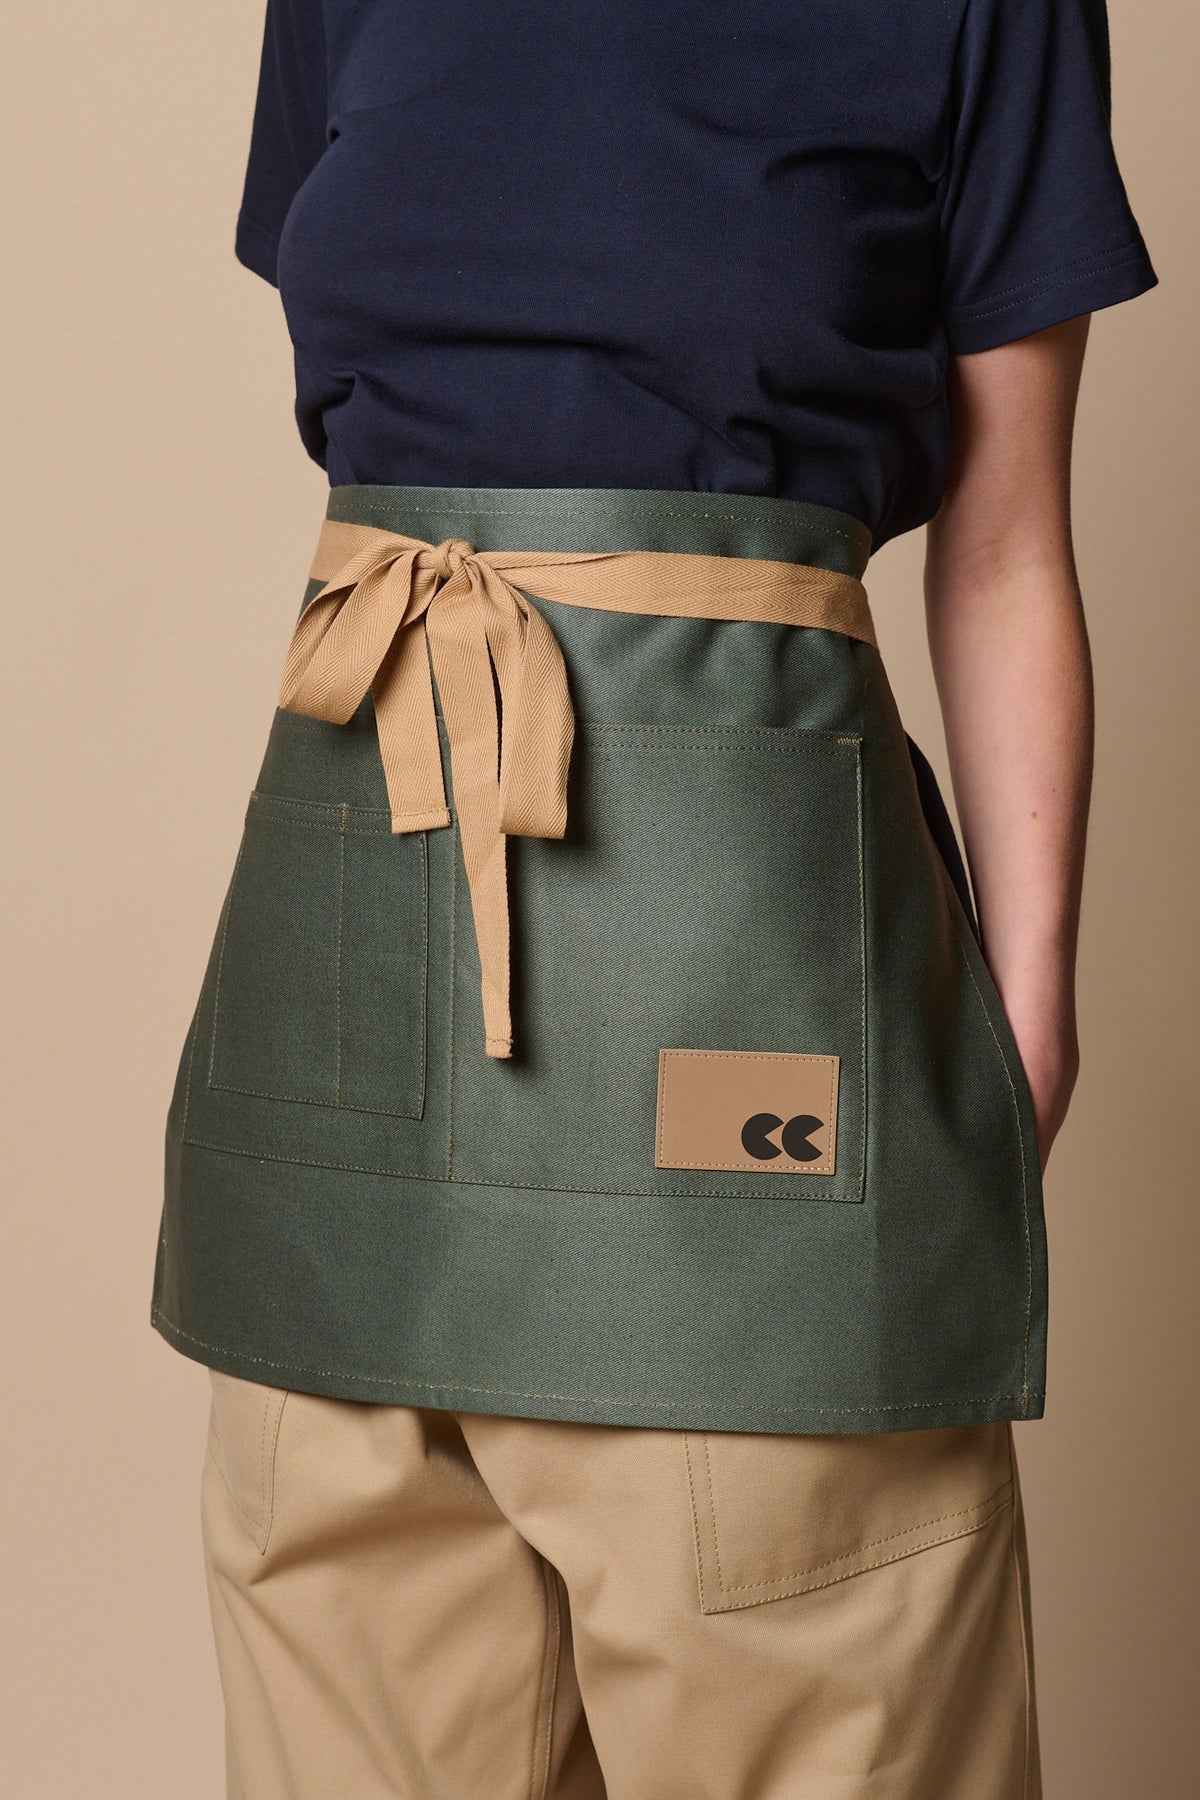 
            Female wearing garden apron in forest, with beige ties tied in a bow at the front. Two large and two smaller pockets on the front of apron. CC logo patch